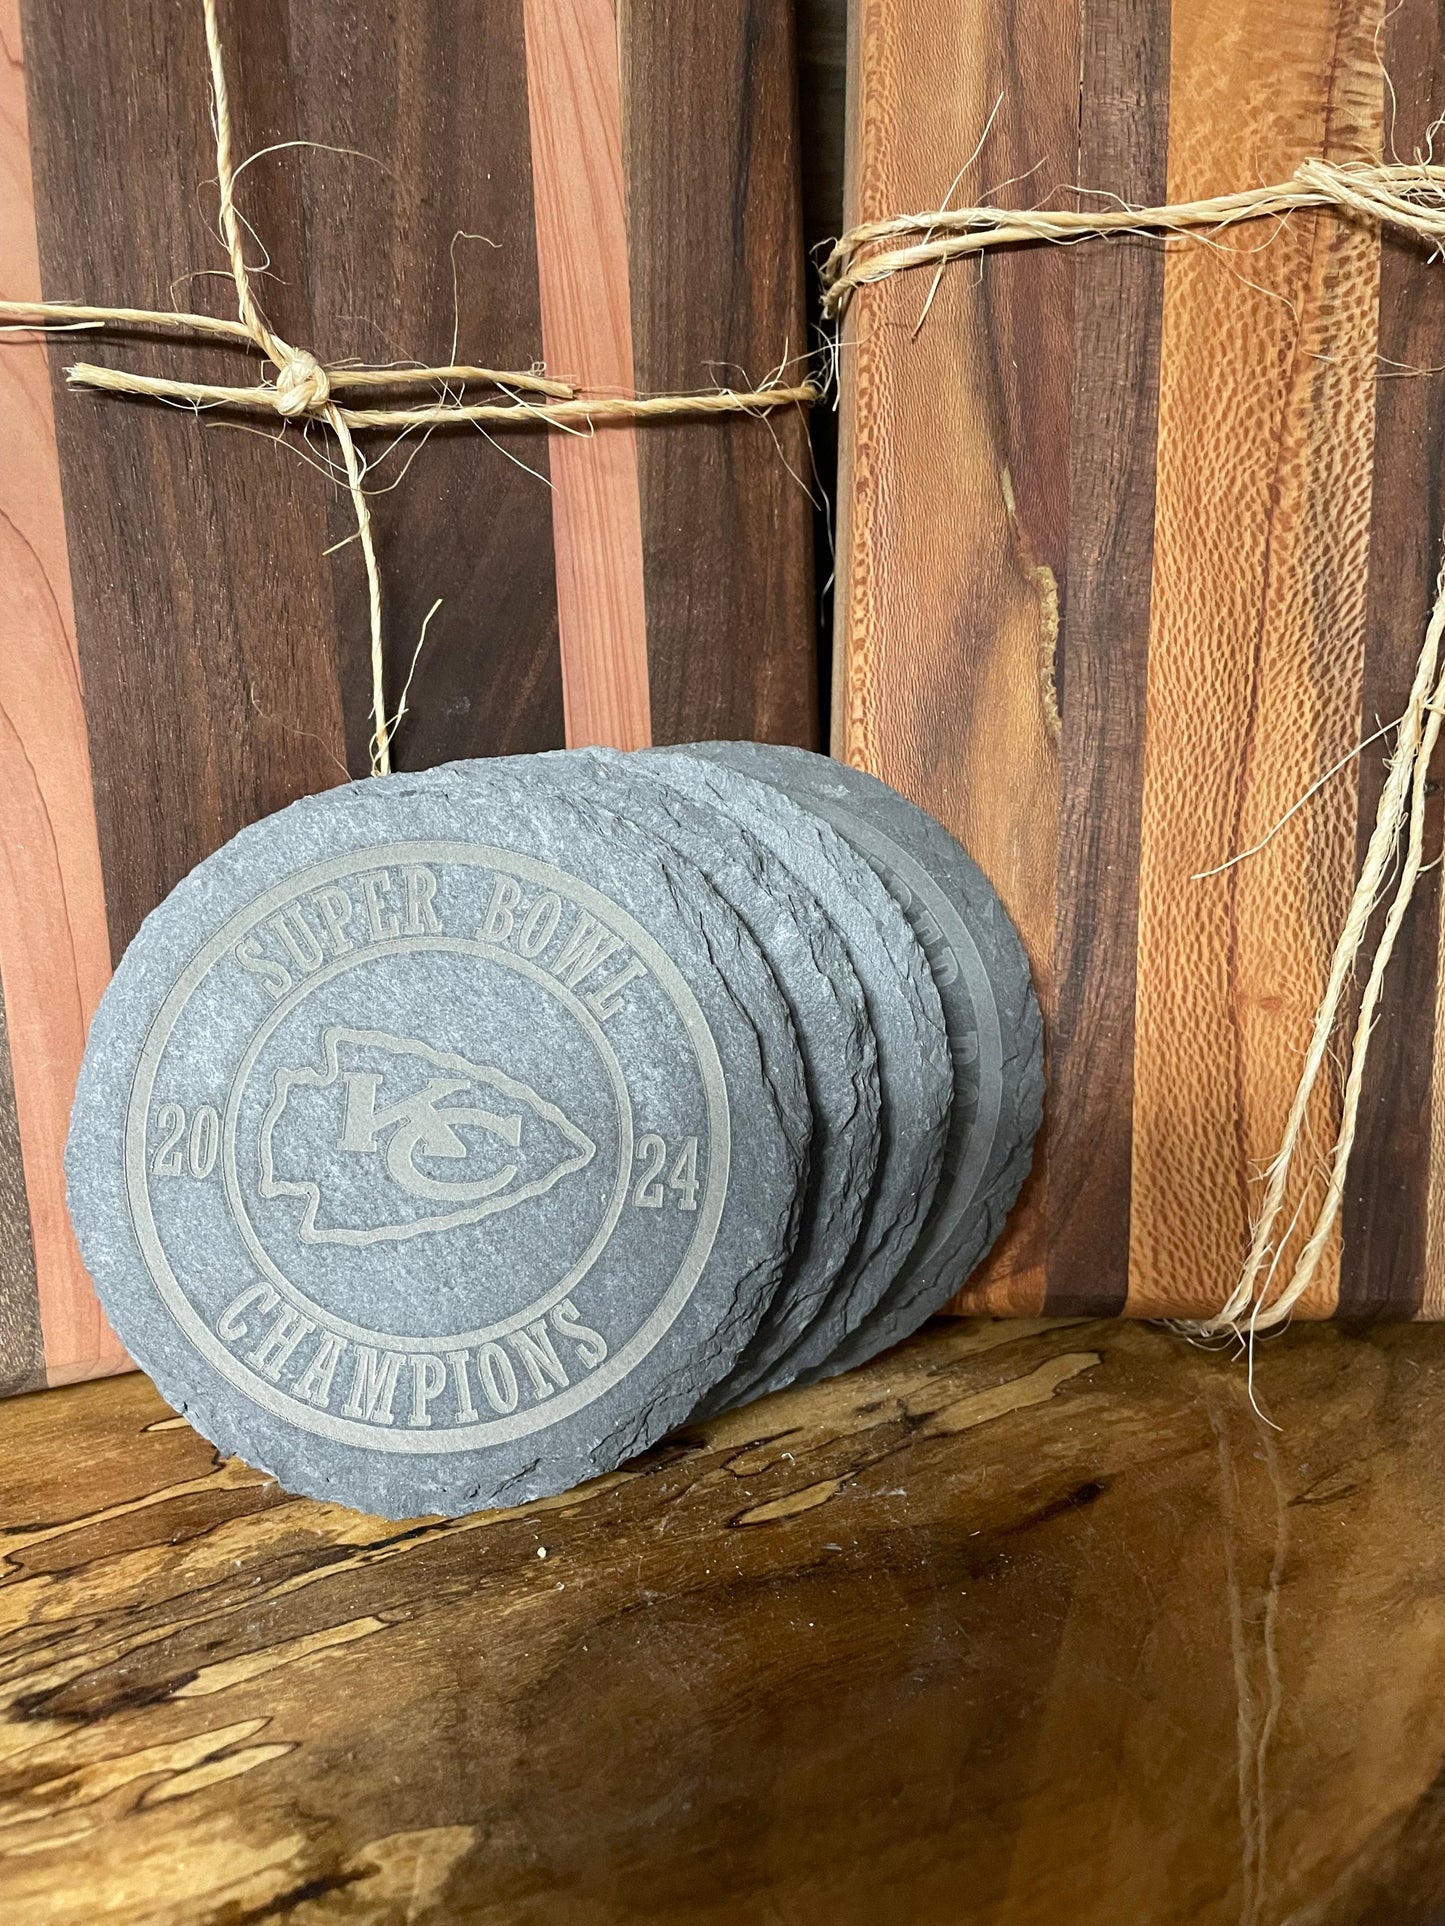 Chiefs Super Bowl Champions Slate Coasters (4 Pack)